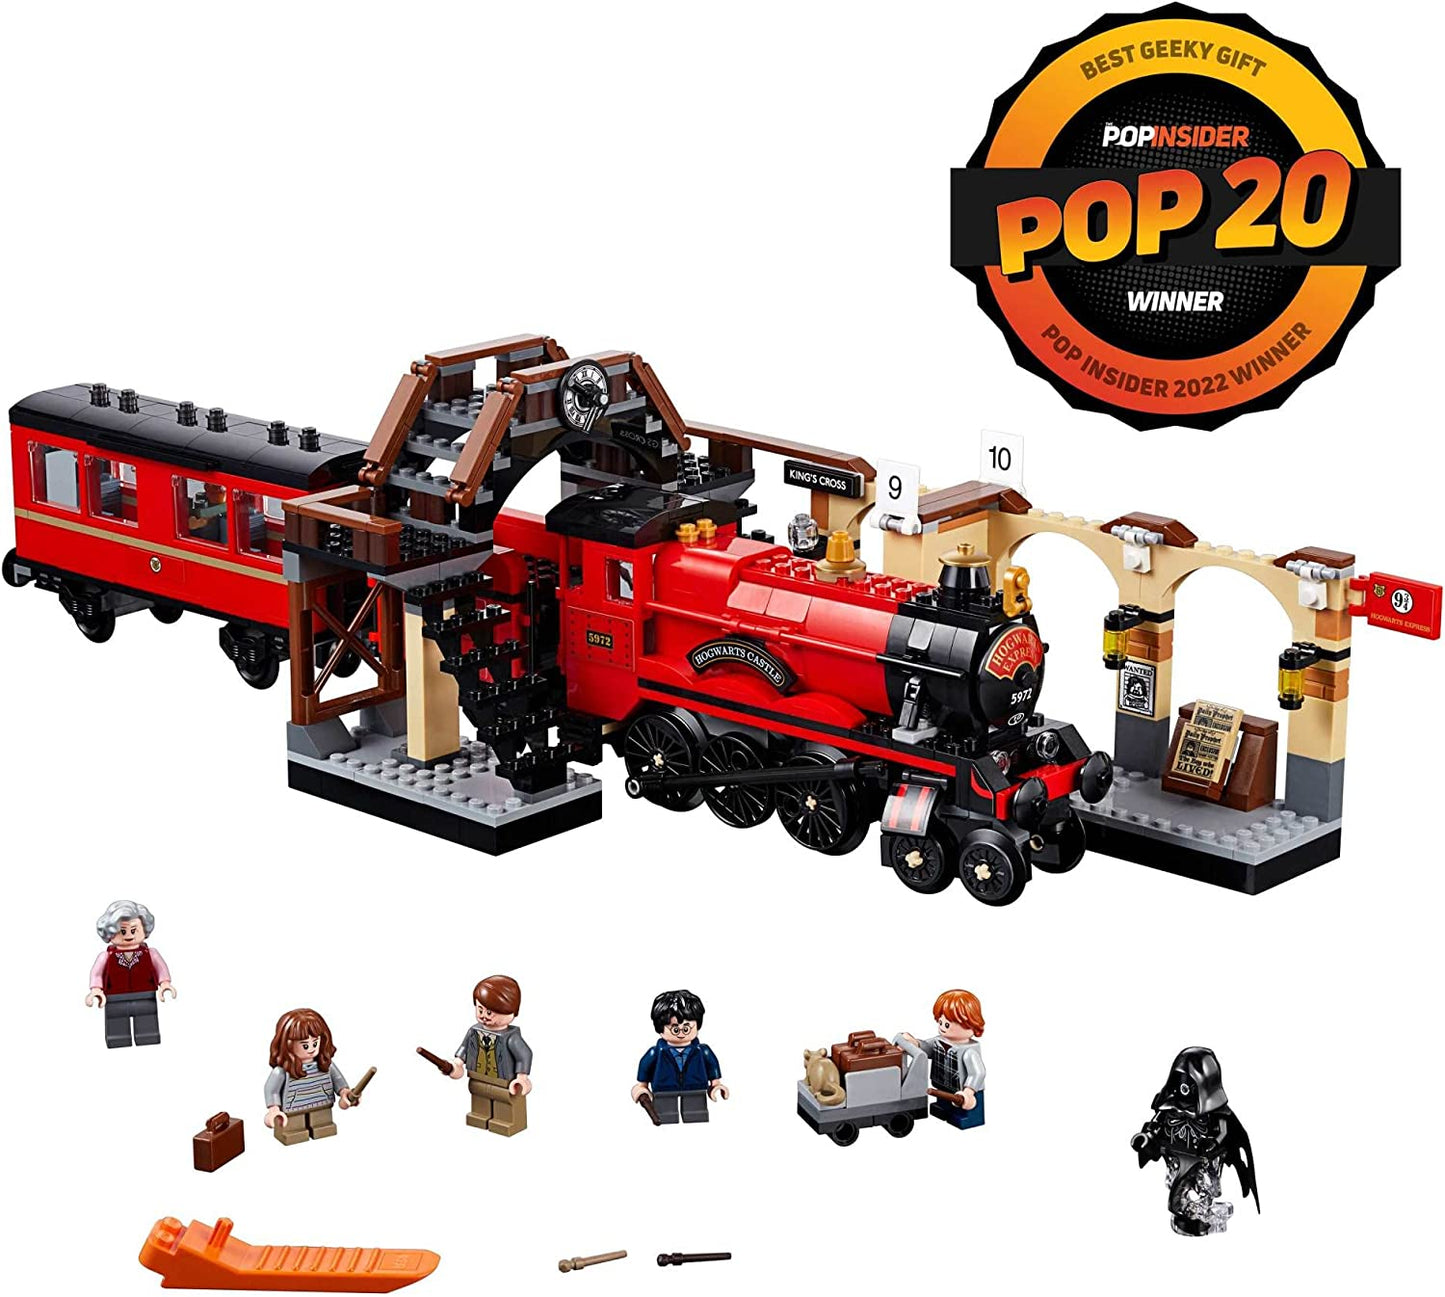 LEGO Harry Potter Hogwarts Express (75955) Toy Train Building Set includes Train and Minifigures